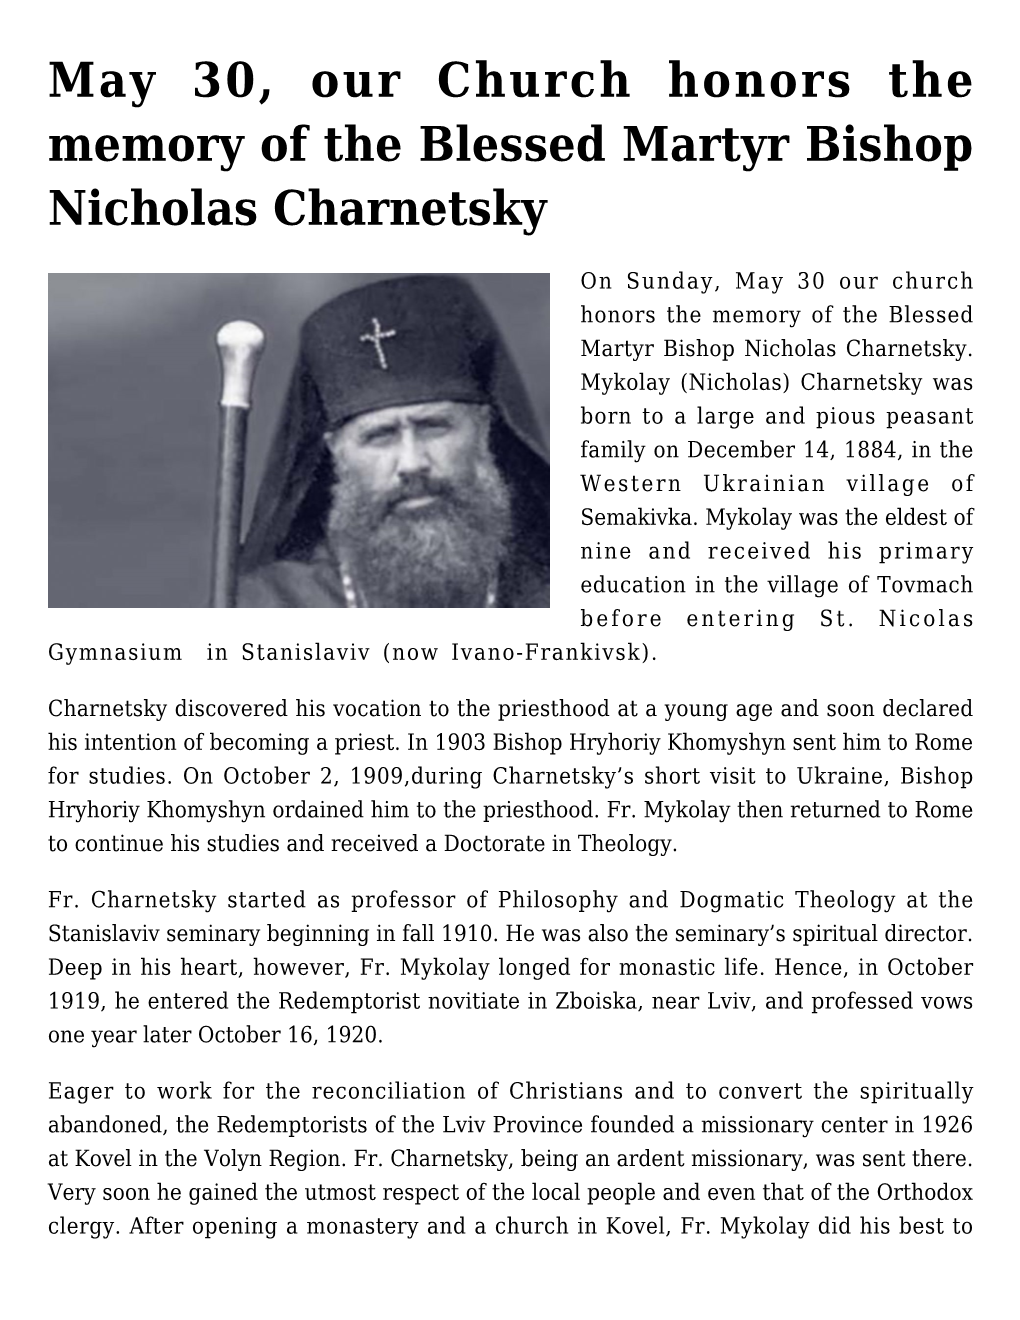 May 30, Our Church Honors the Memory of the Blessed Martyr Bishop Nicholas Charnetsky